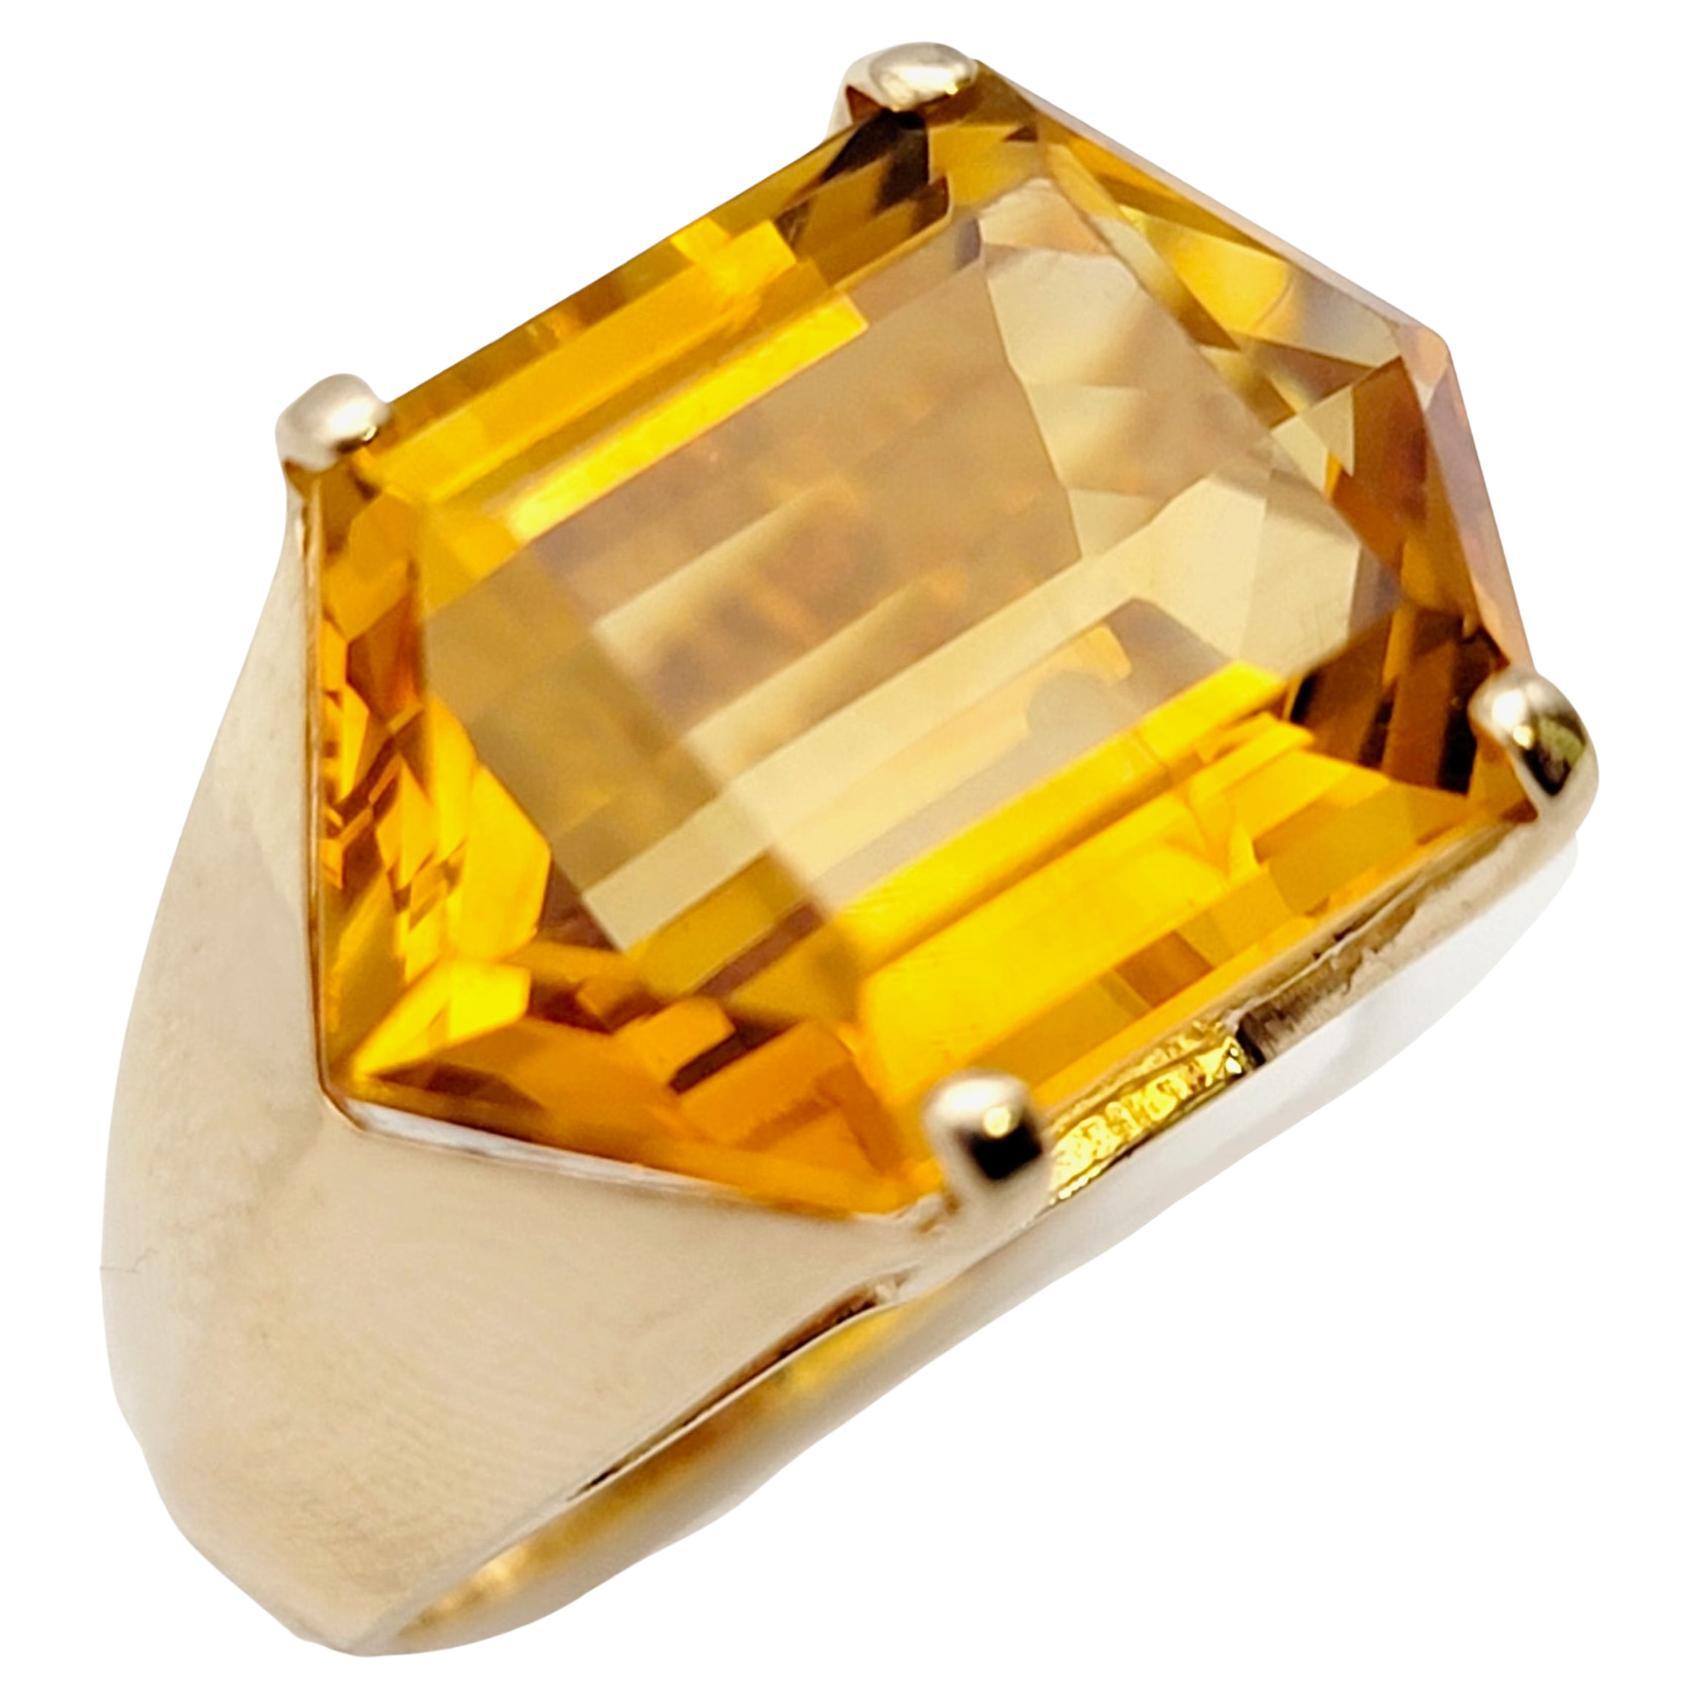 10.46 Carats Total Hexagonal Cut Citrine Cocktail Ring in 14 Karat Yellow Gold For Sale